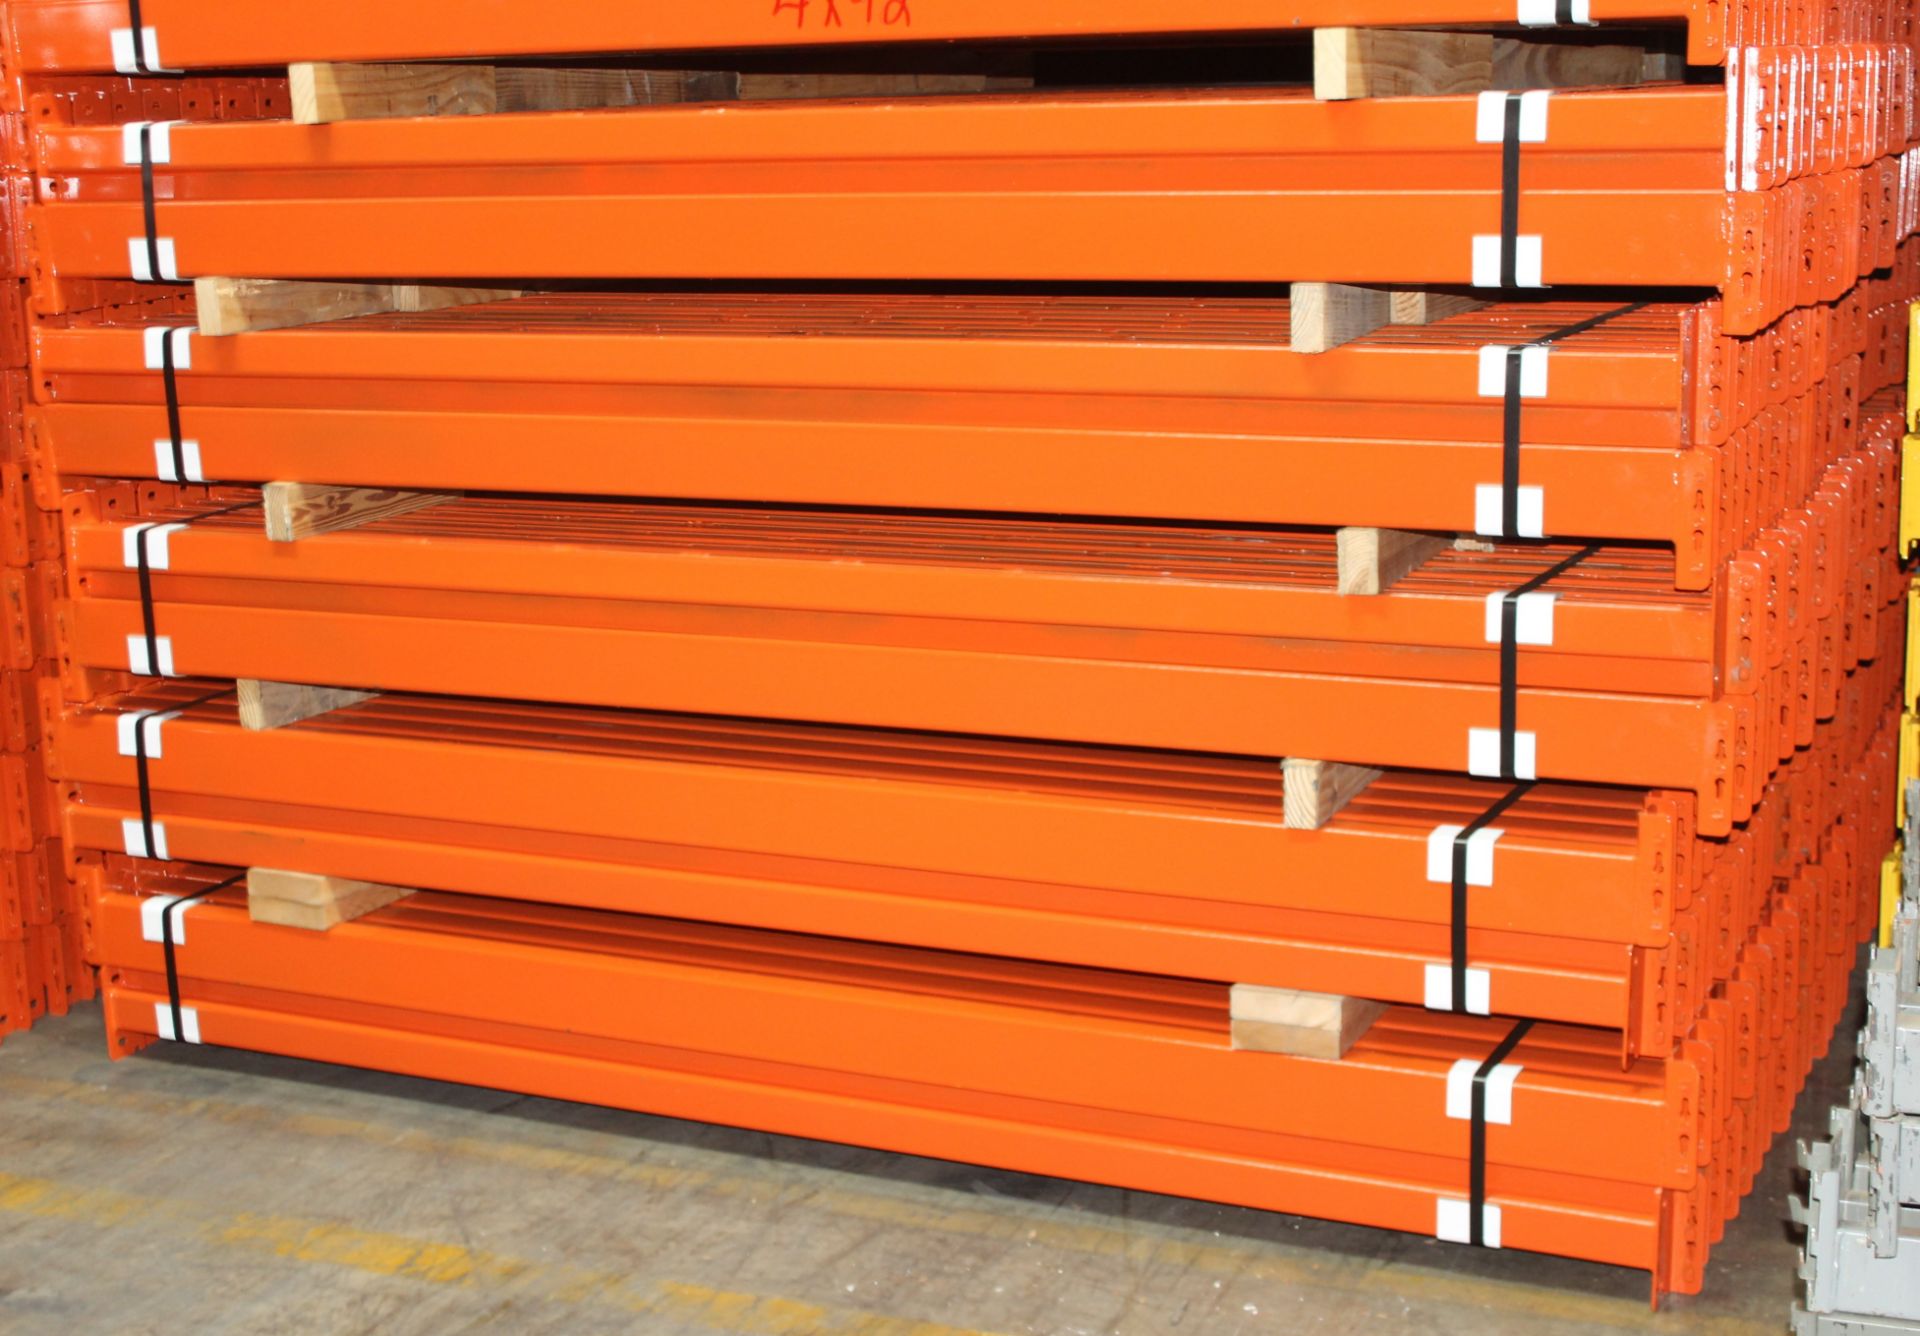 14 BAYS OF TEARDROP STYLE PALLET RACK, LIKE NEW, SIZE: 12'H x 36"D X 8'W - Image 2 of 5